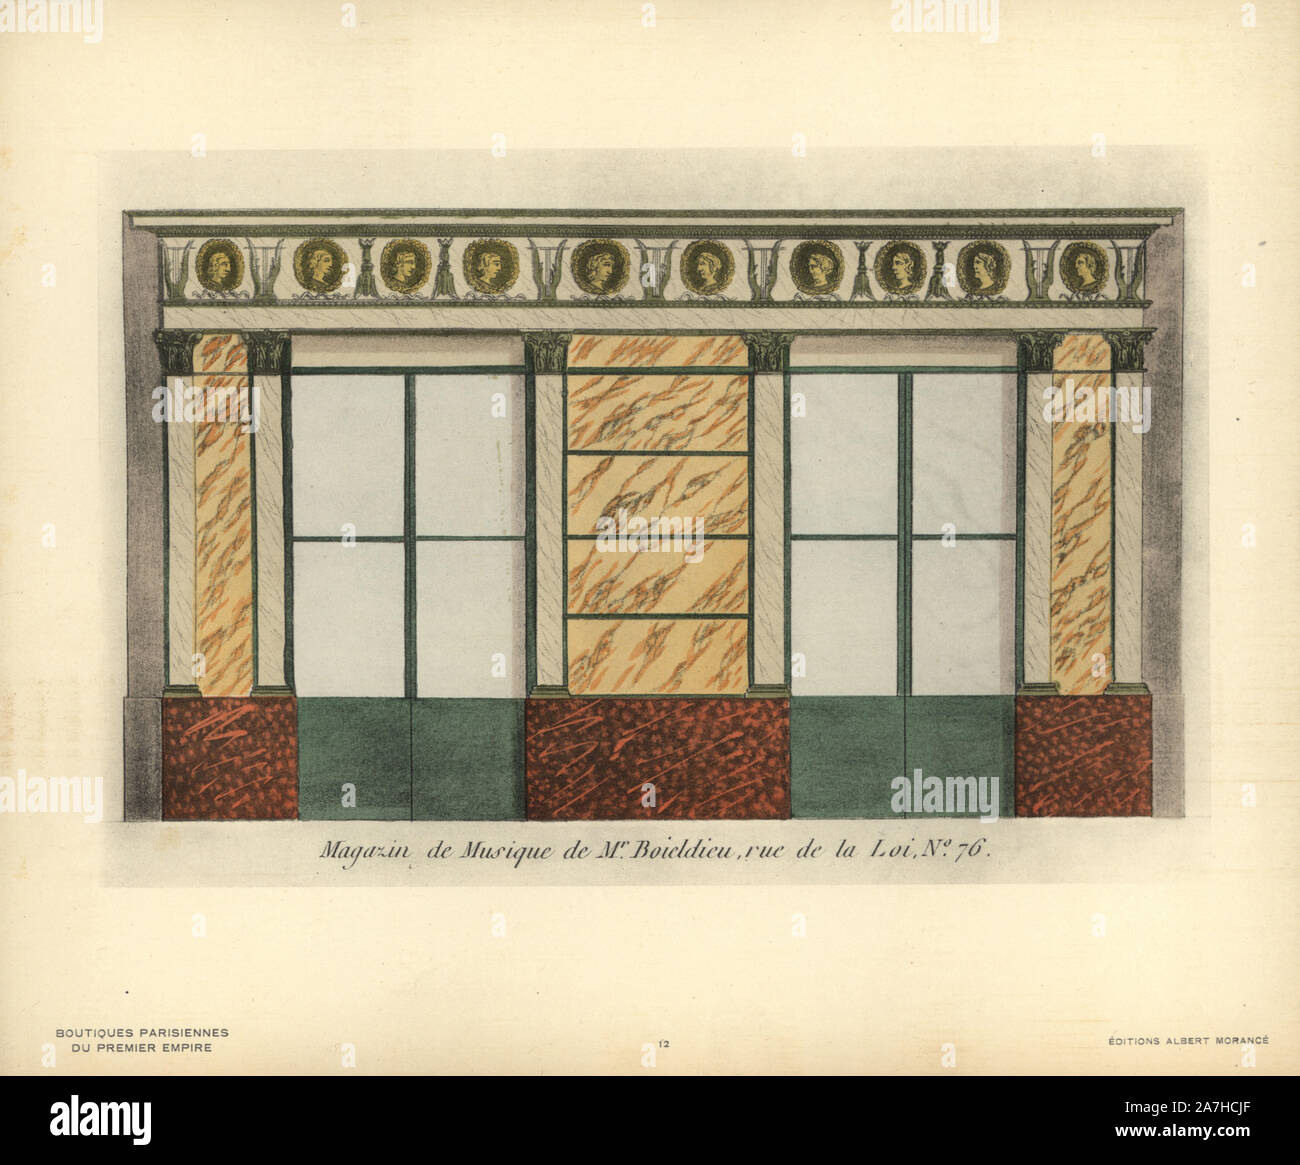 Shopfront of Monsieur Boieldieu's music store, 76 rue de la Loi, Paris, circa 1800. Handcoloured lithograph from Hector-Martin Lefuel's 'Boutiques Parisiennes du Premier Empire,' (Parisian Stores of the First Empire), Paris, Albert Morance, 1925. The lithographs were reproduced from watercolors by the French architect Hector-Martin Lefuel (1810-1880), famous for his work on the completion of the Louvre and Fontainebleau. Stock Photo